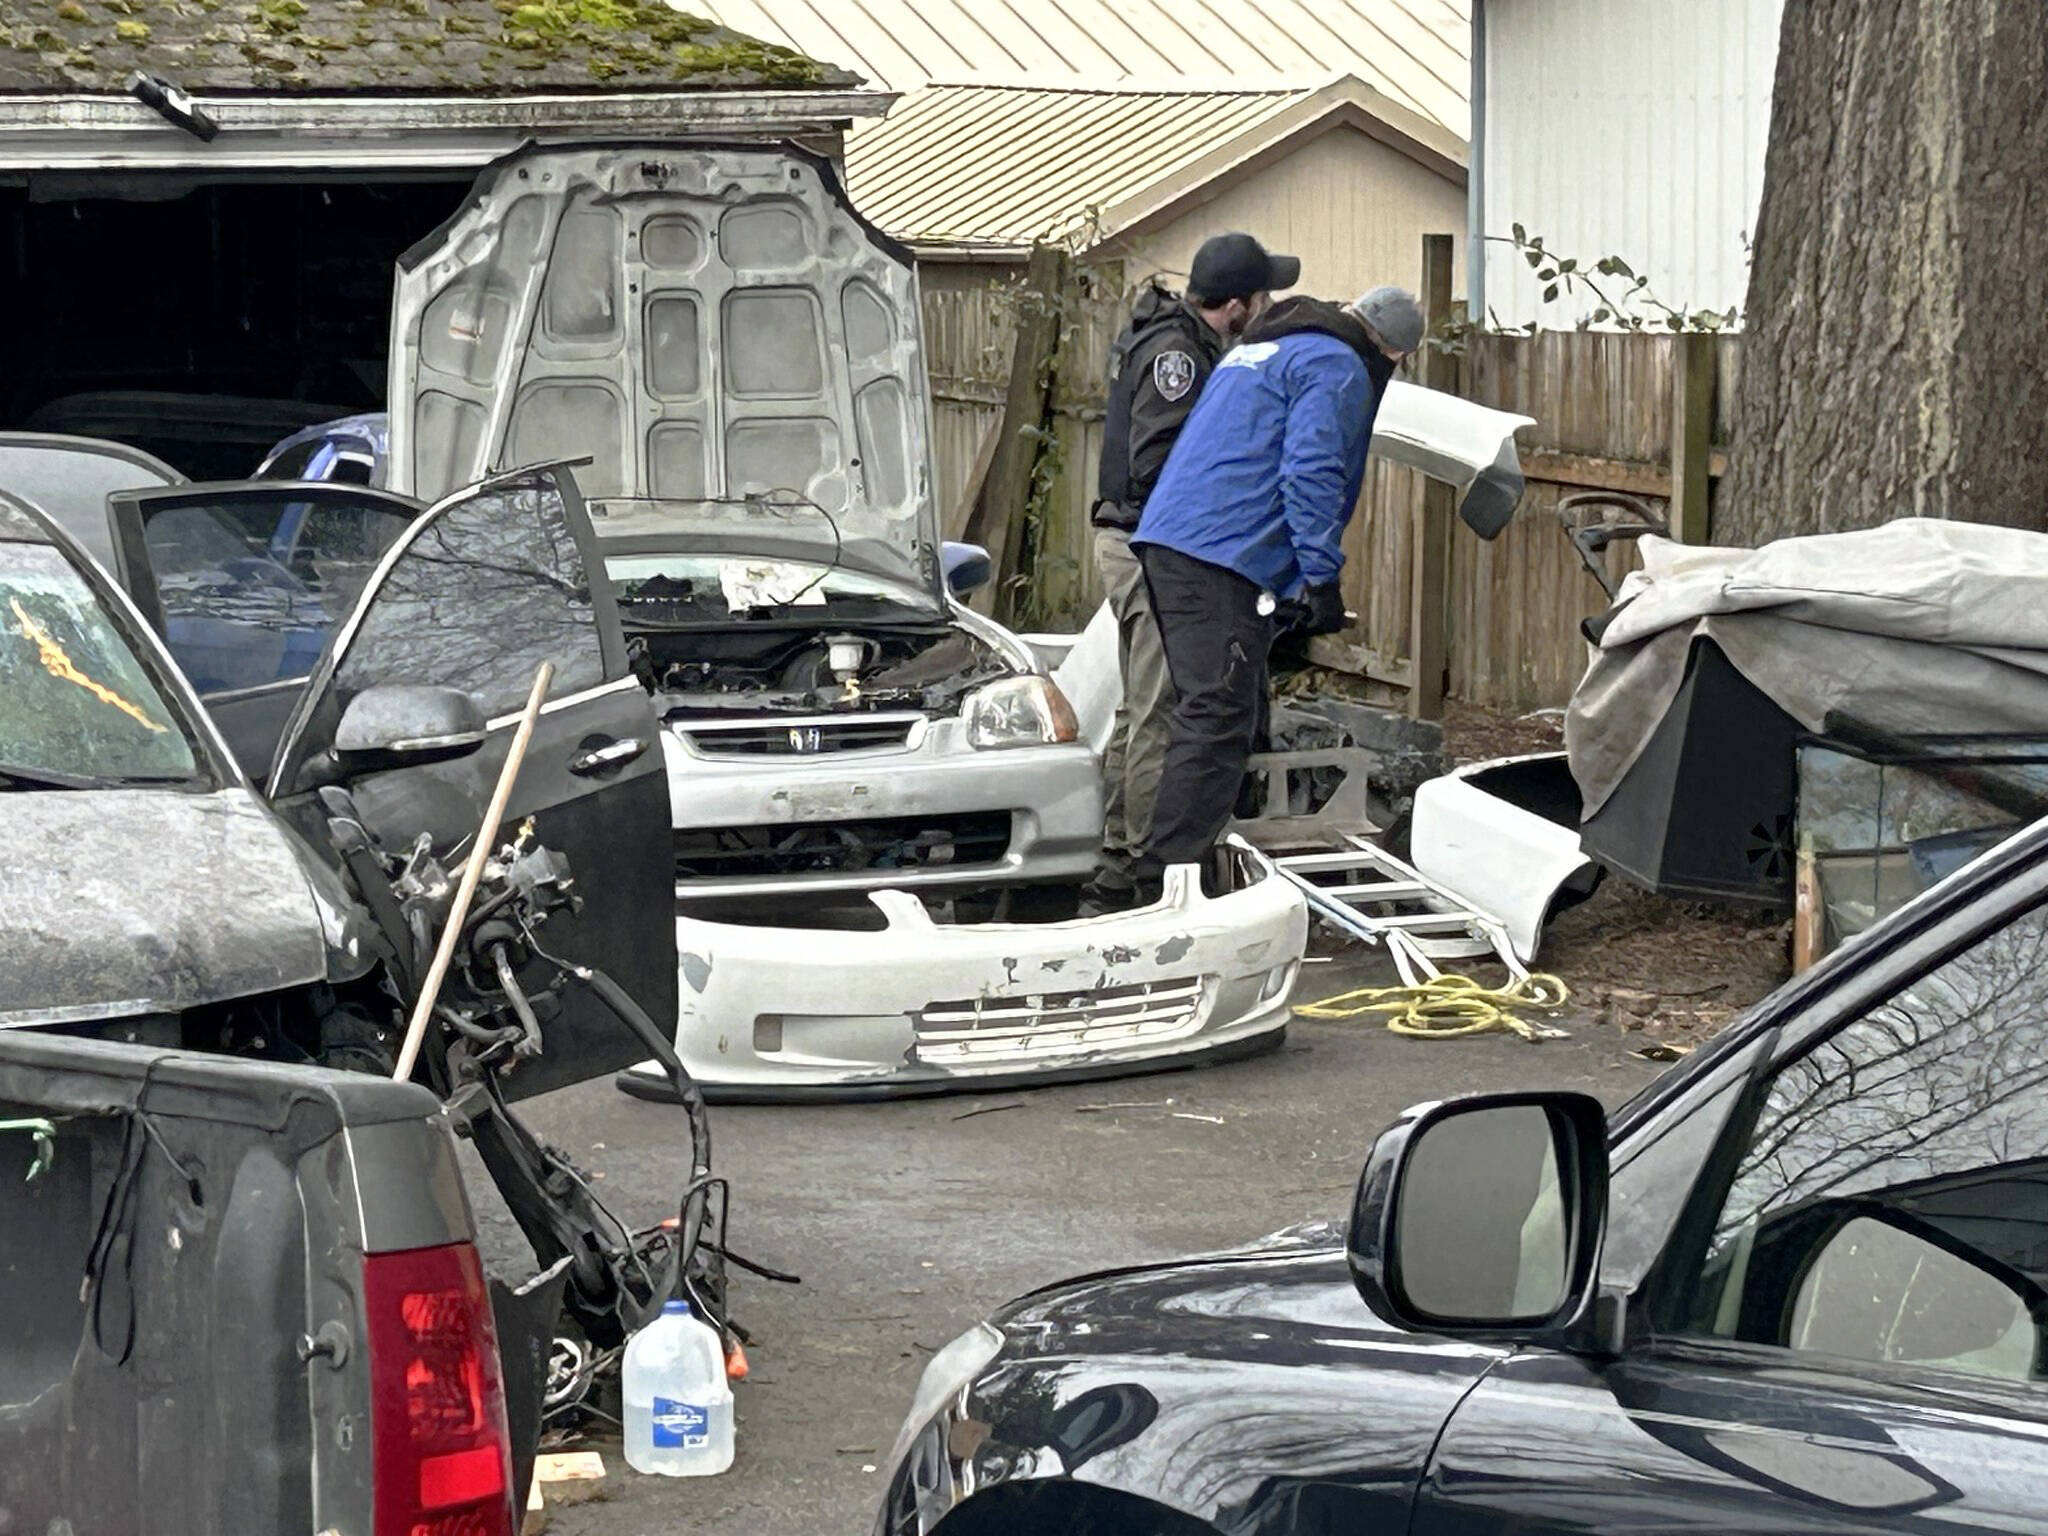 Officers search an alleged chop shop in Kent. COURTESY PHOTO, Kent Police